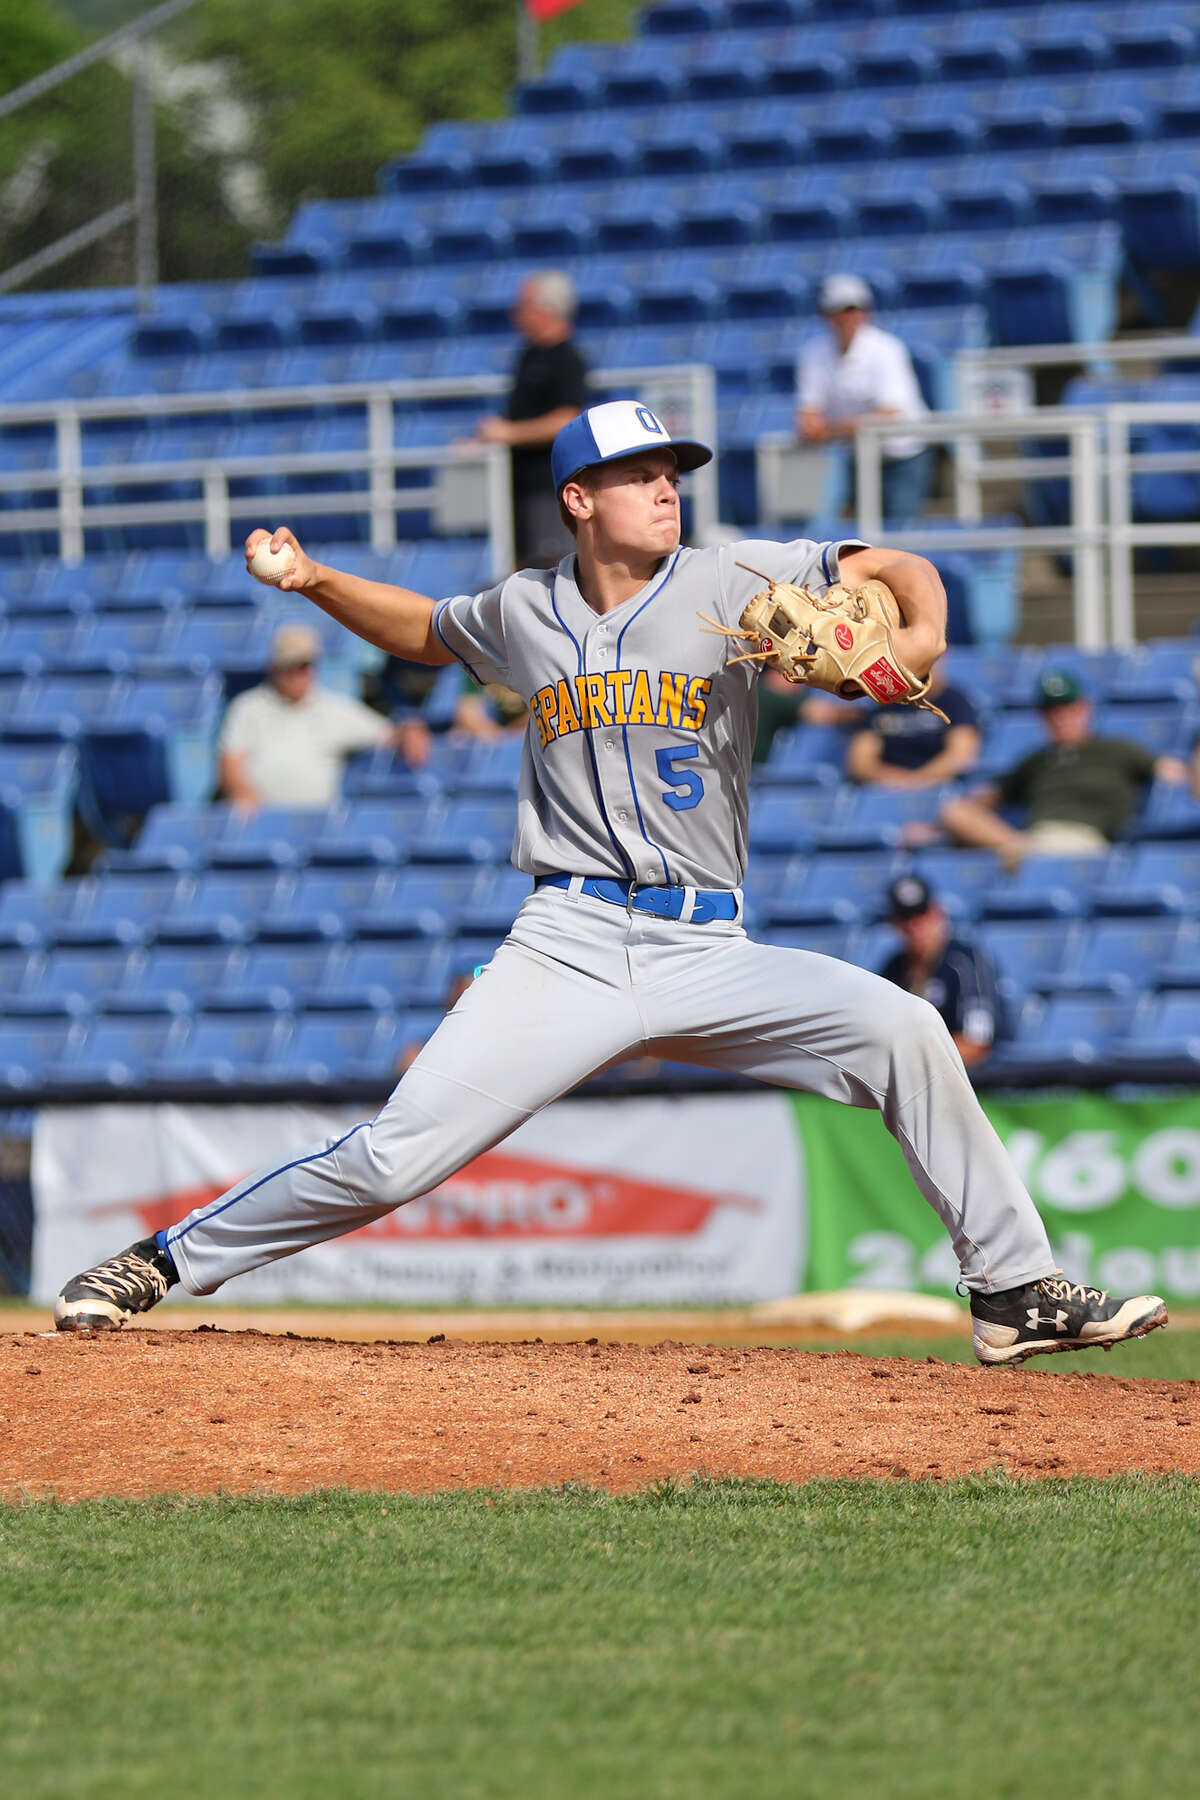 Queensbury graduate Jack Sylvia pitched two innings of scoreless relief for the Amsterdam Mohawks on Monday in an 11-5 victory over the Albany Dutchmen at Keenholts Park in Guilderland.